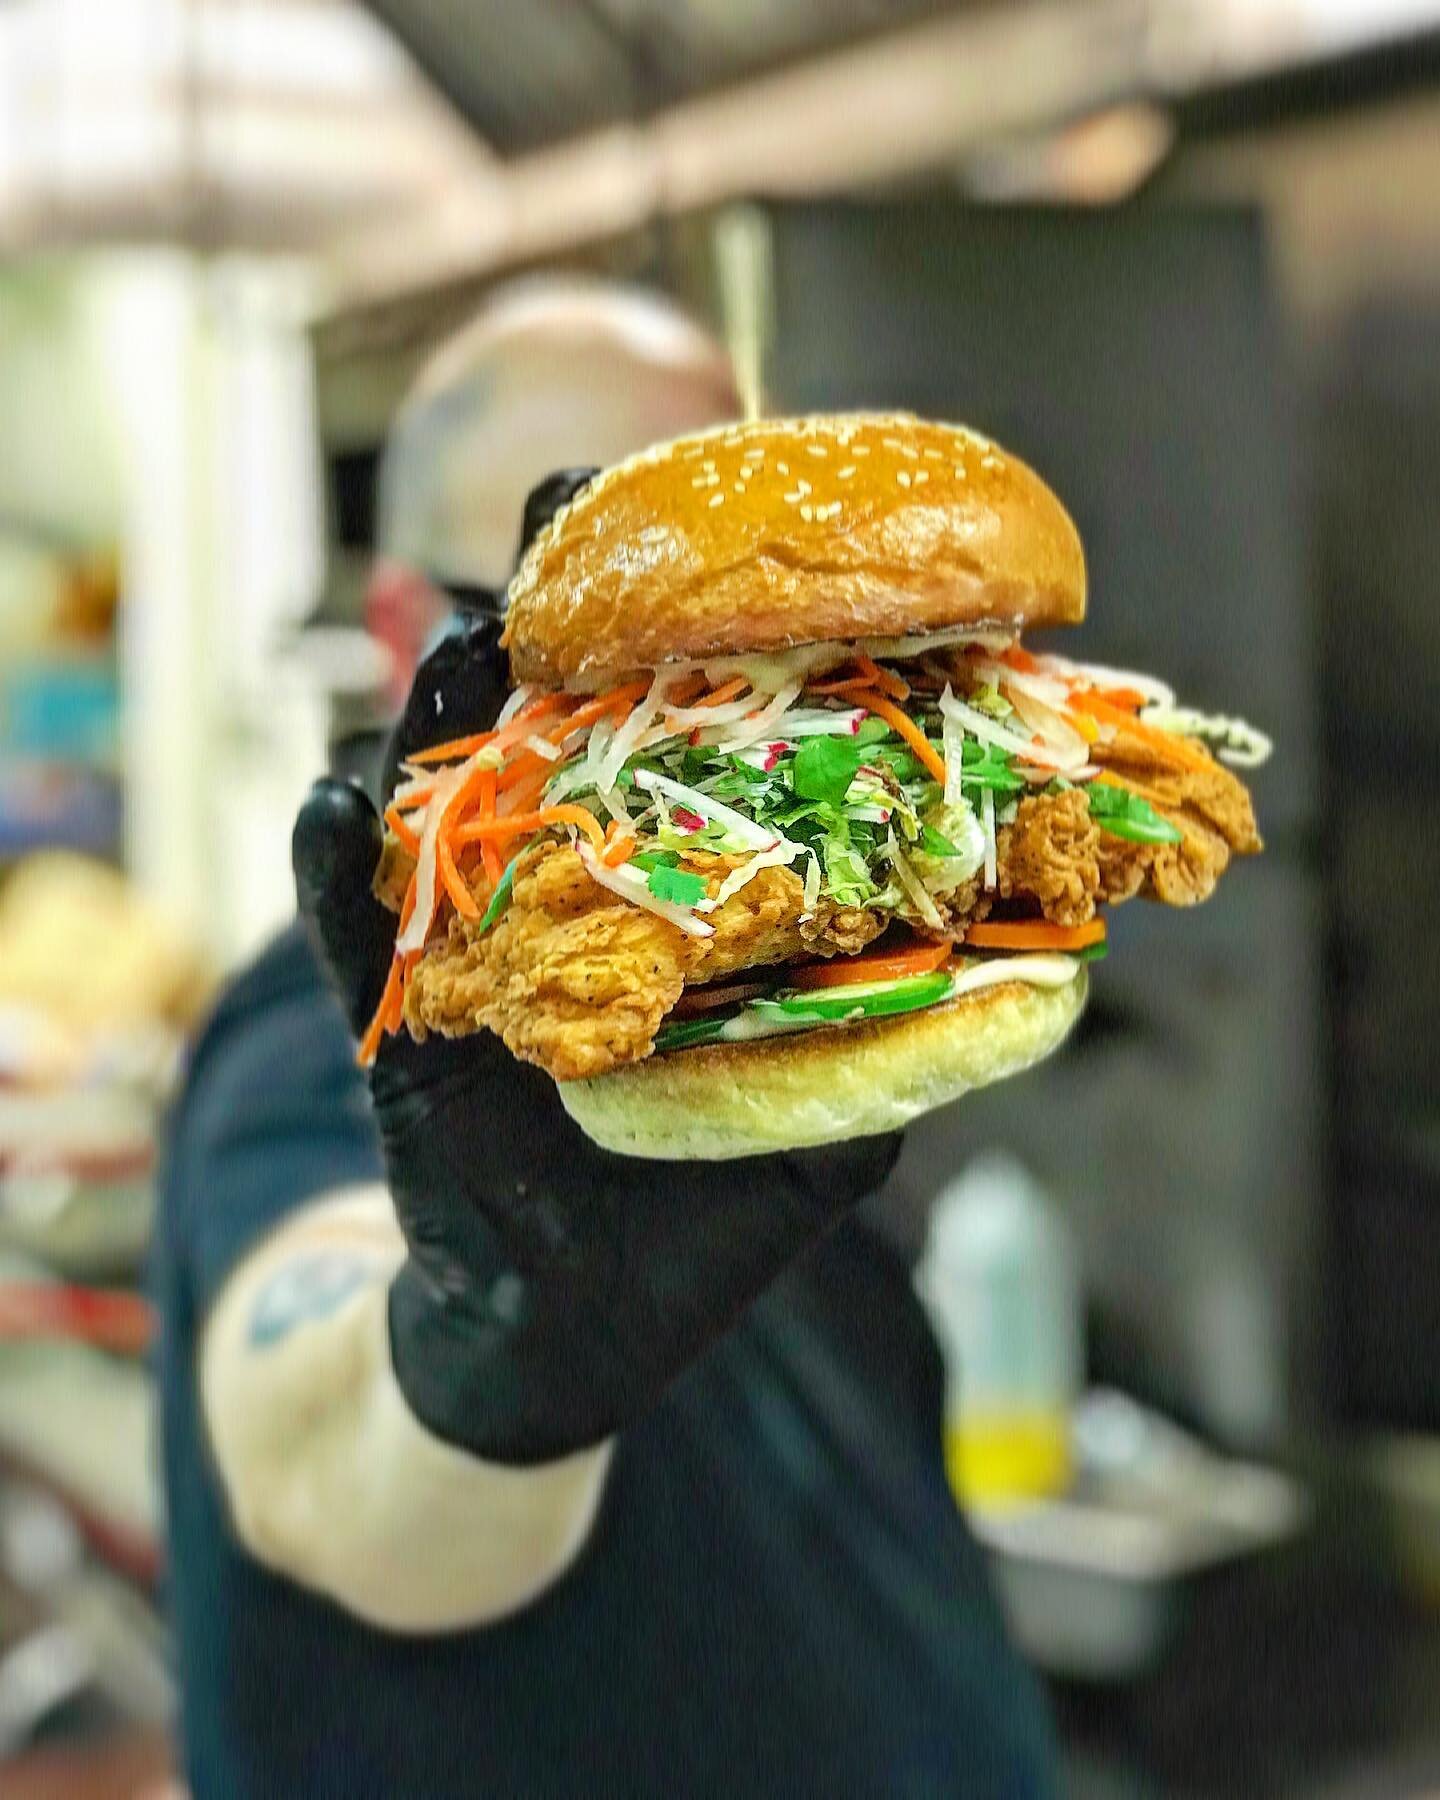 This will be the finest fried chicken sandwich you will get your hands on, you can mark my word!! #holdonimcoming #illegalfoodforlife #illegalfood #illegalfoodatl #illegalfoodatlanta